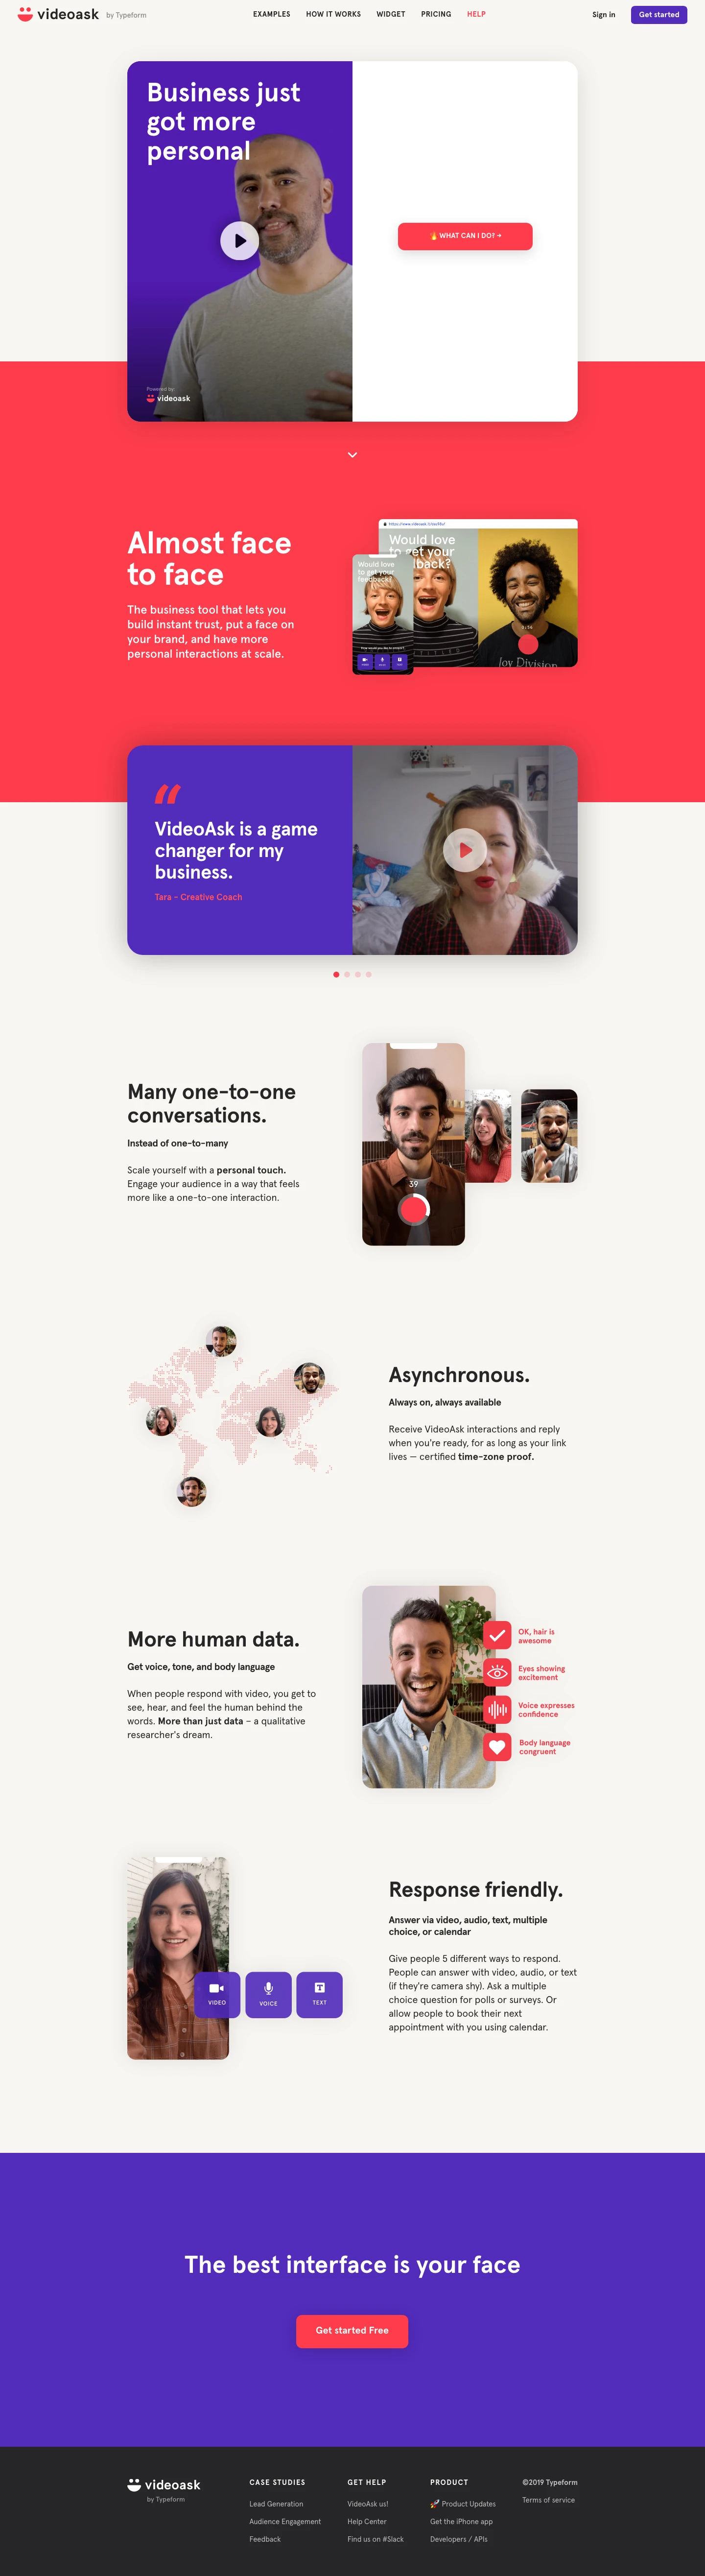 VideoAsk by Typeform Landing Page Example: The business tool that lets you build instant trust, put a face on your brand, and have more personal interactions at scale.